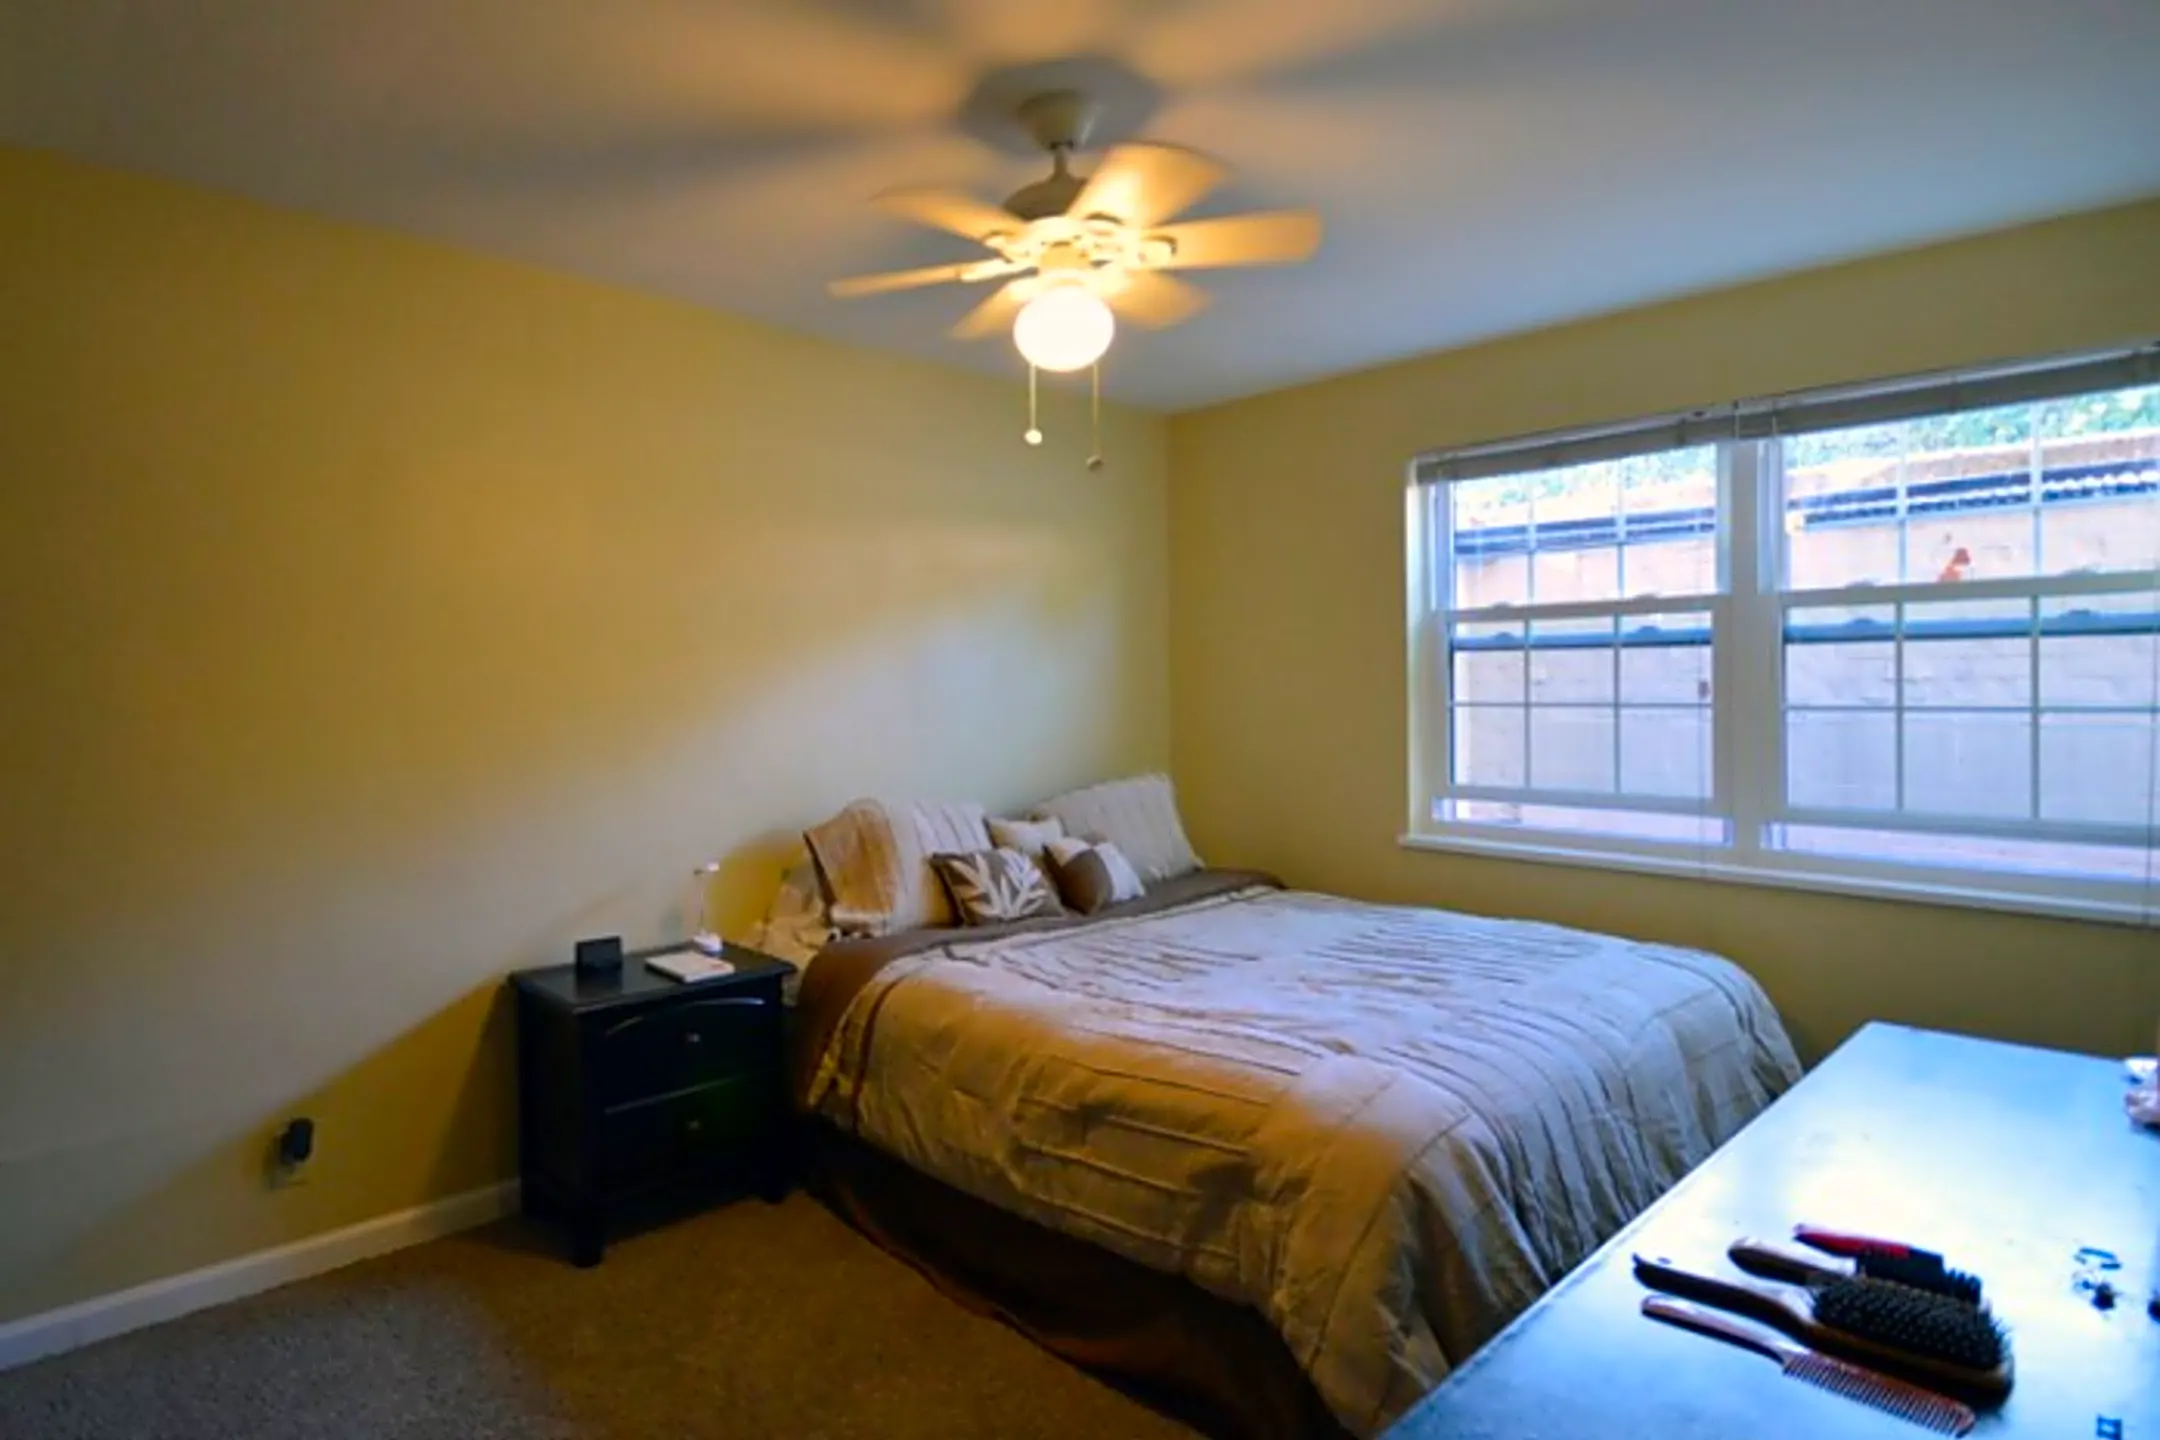 Bedroom - The Westmoreland - Shaker Heights, OH